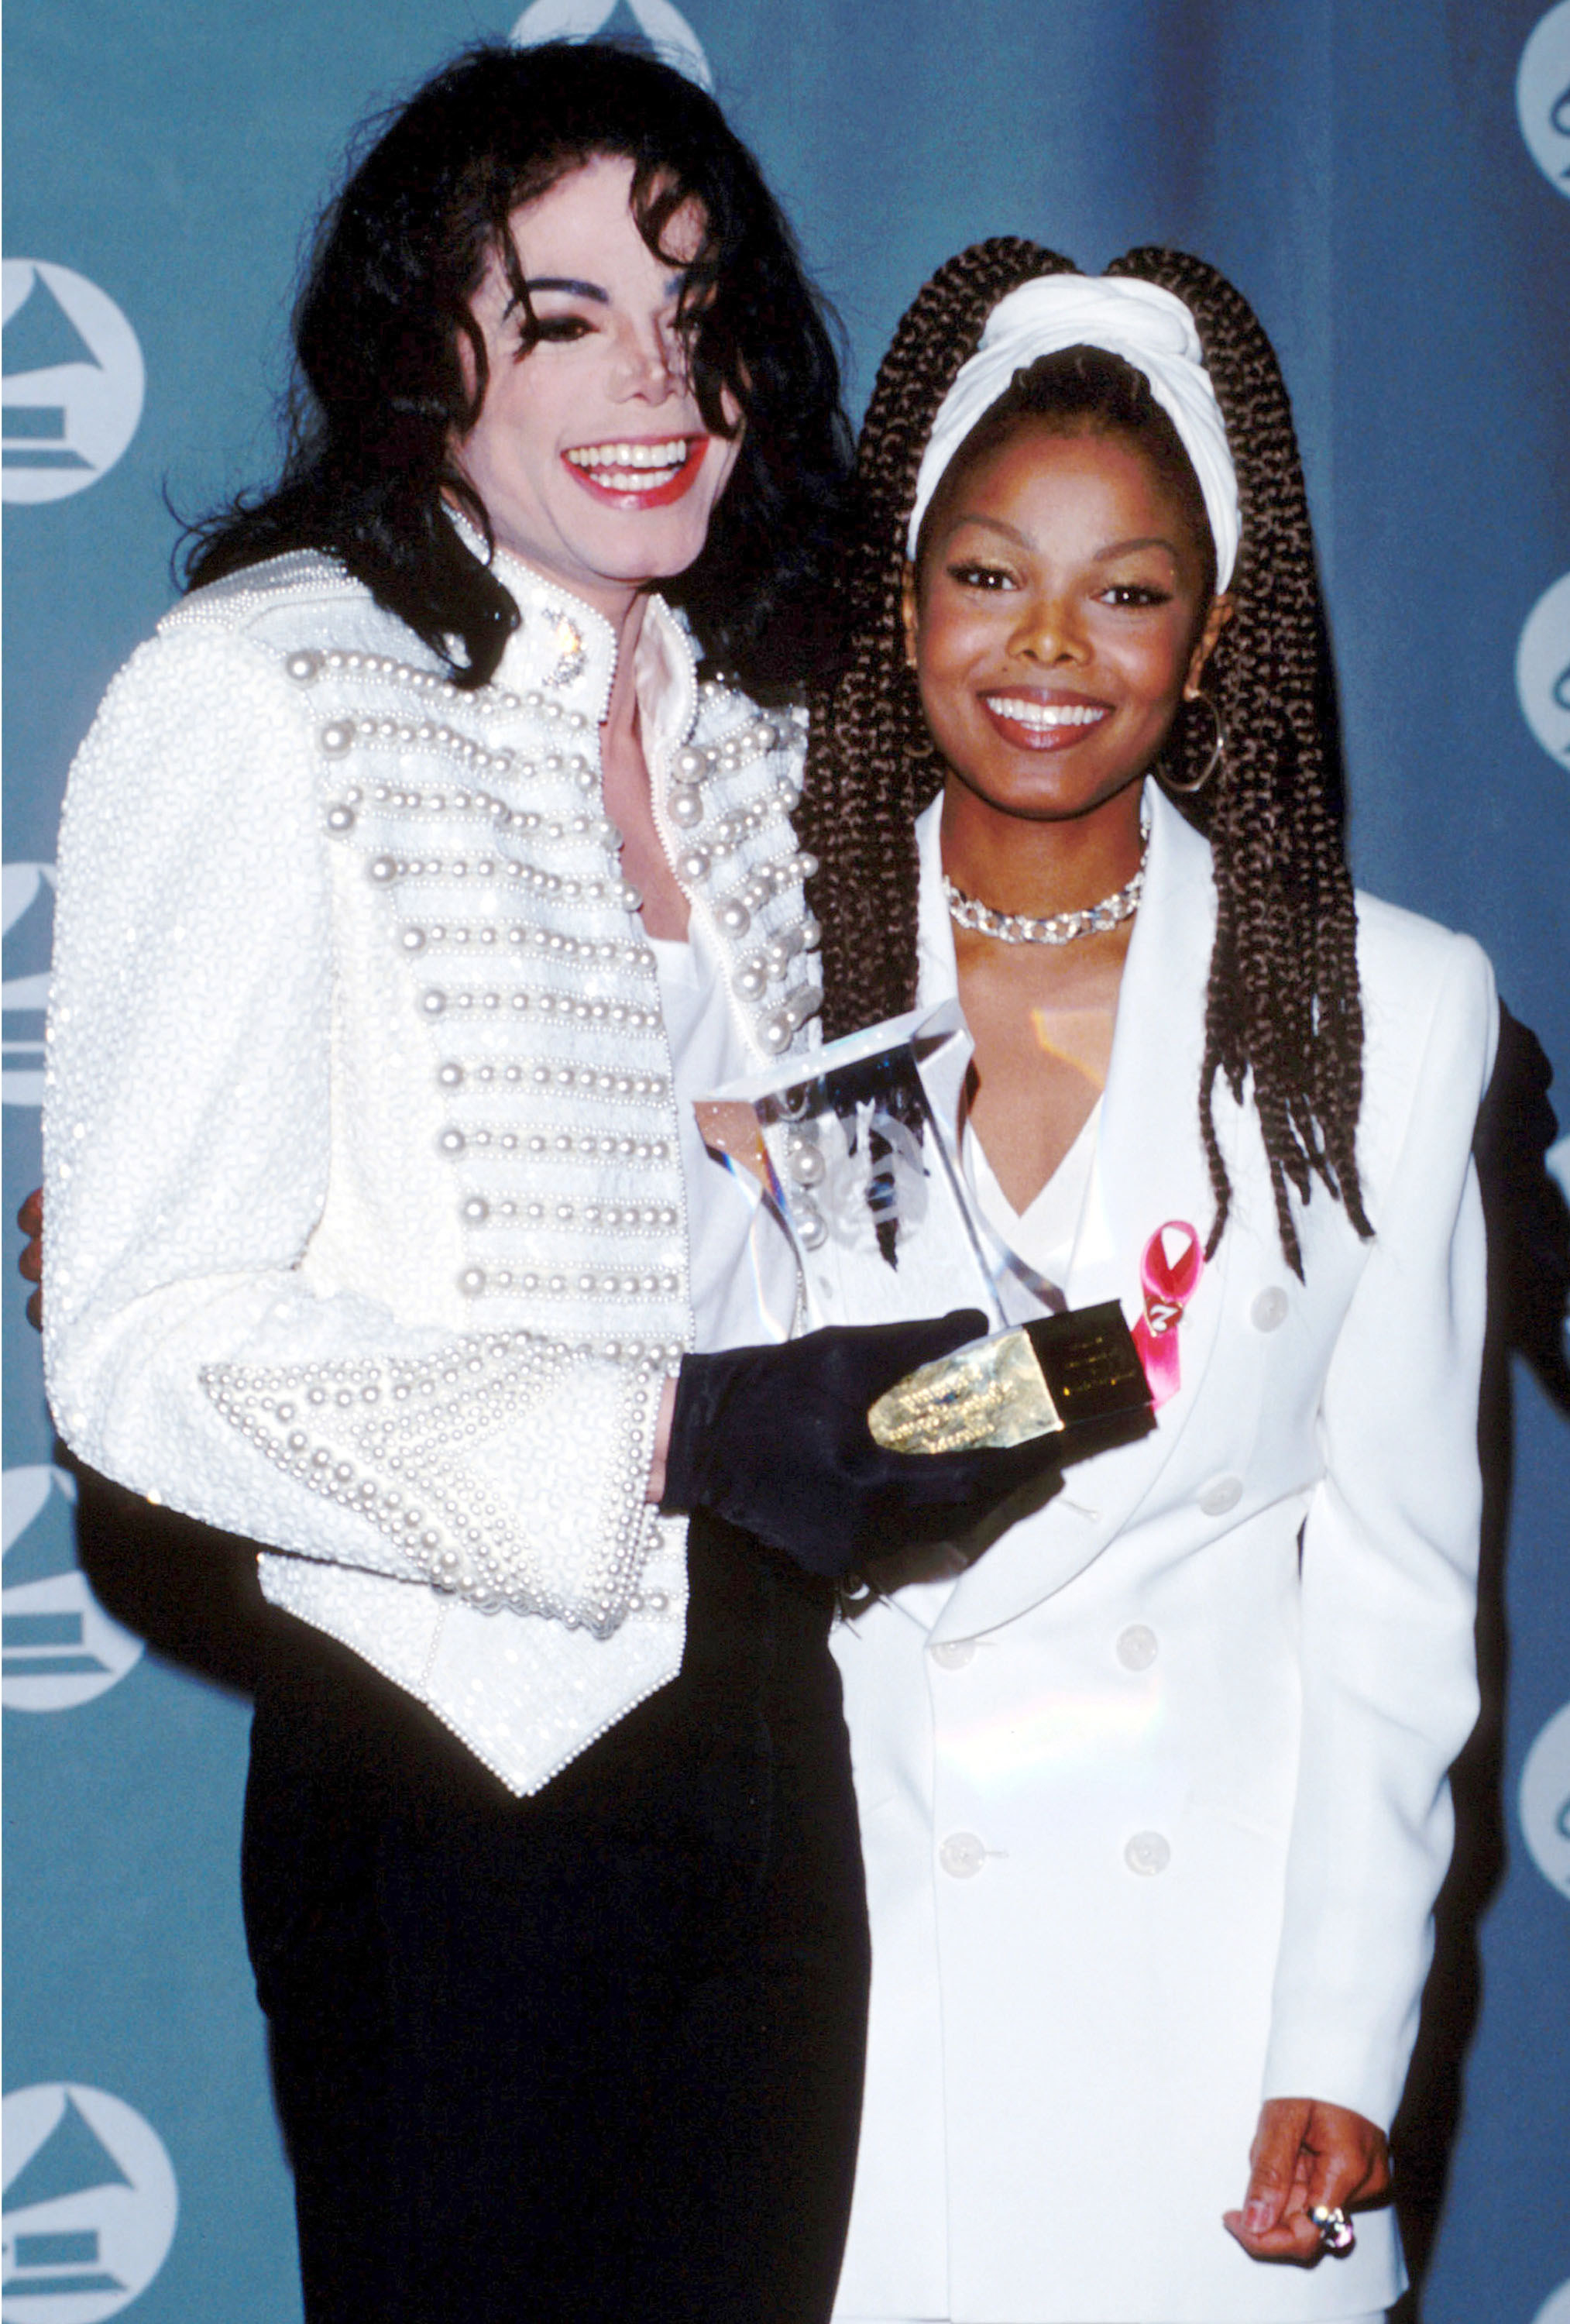 Michael Jackson and Janet Jackson at the Shrine Auditorium in Los Angeles, California in 1993